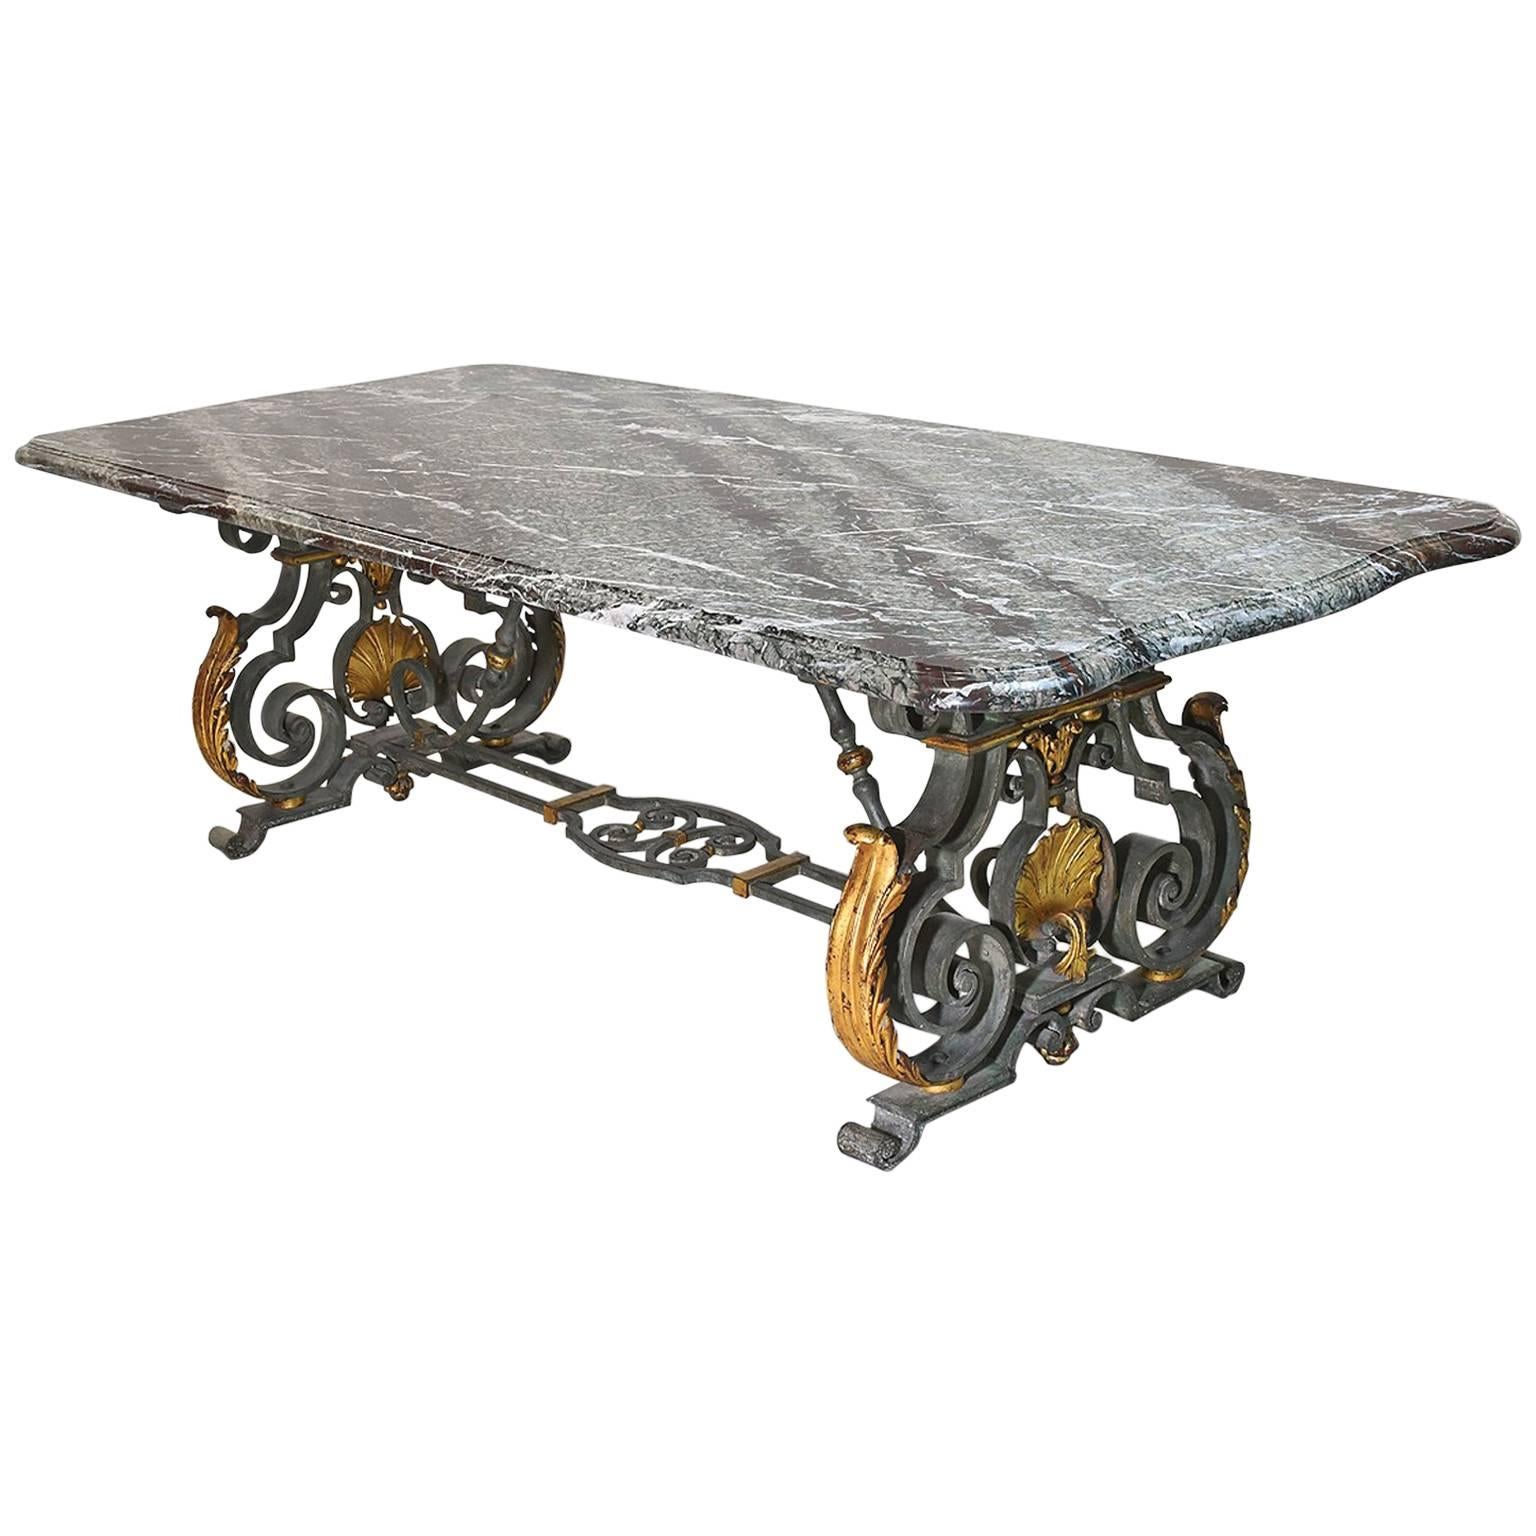 French Rococo-Style Campan Melange Marble-Top Dining Table with Forged Iron Base